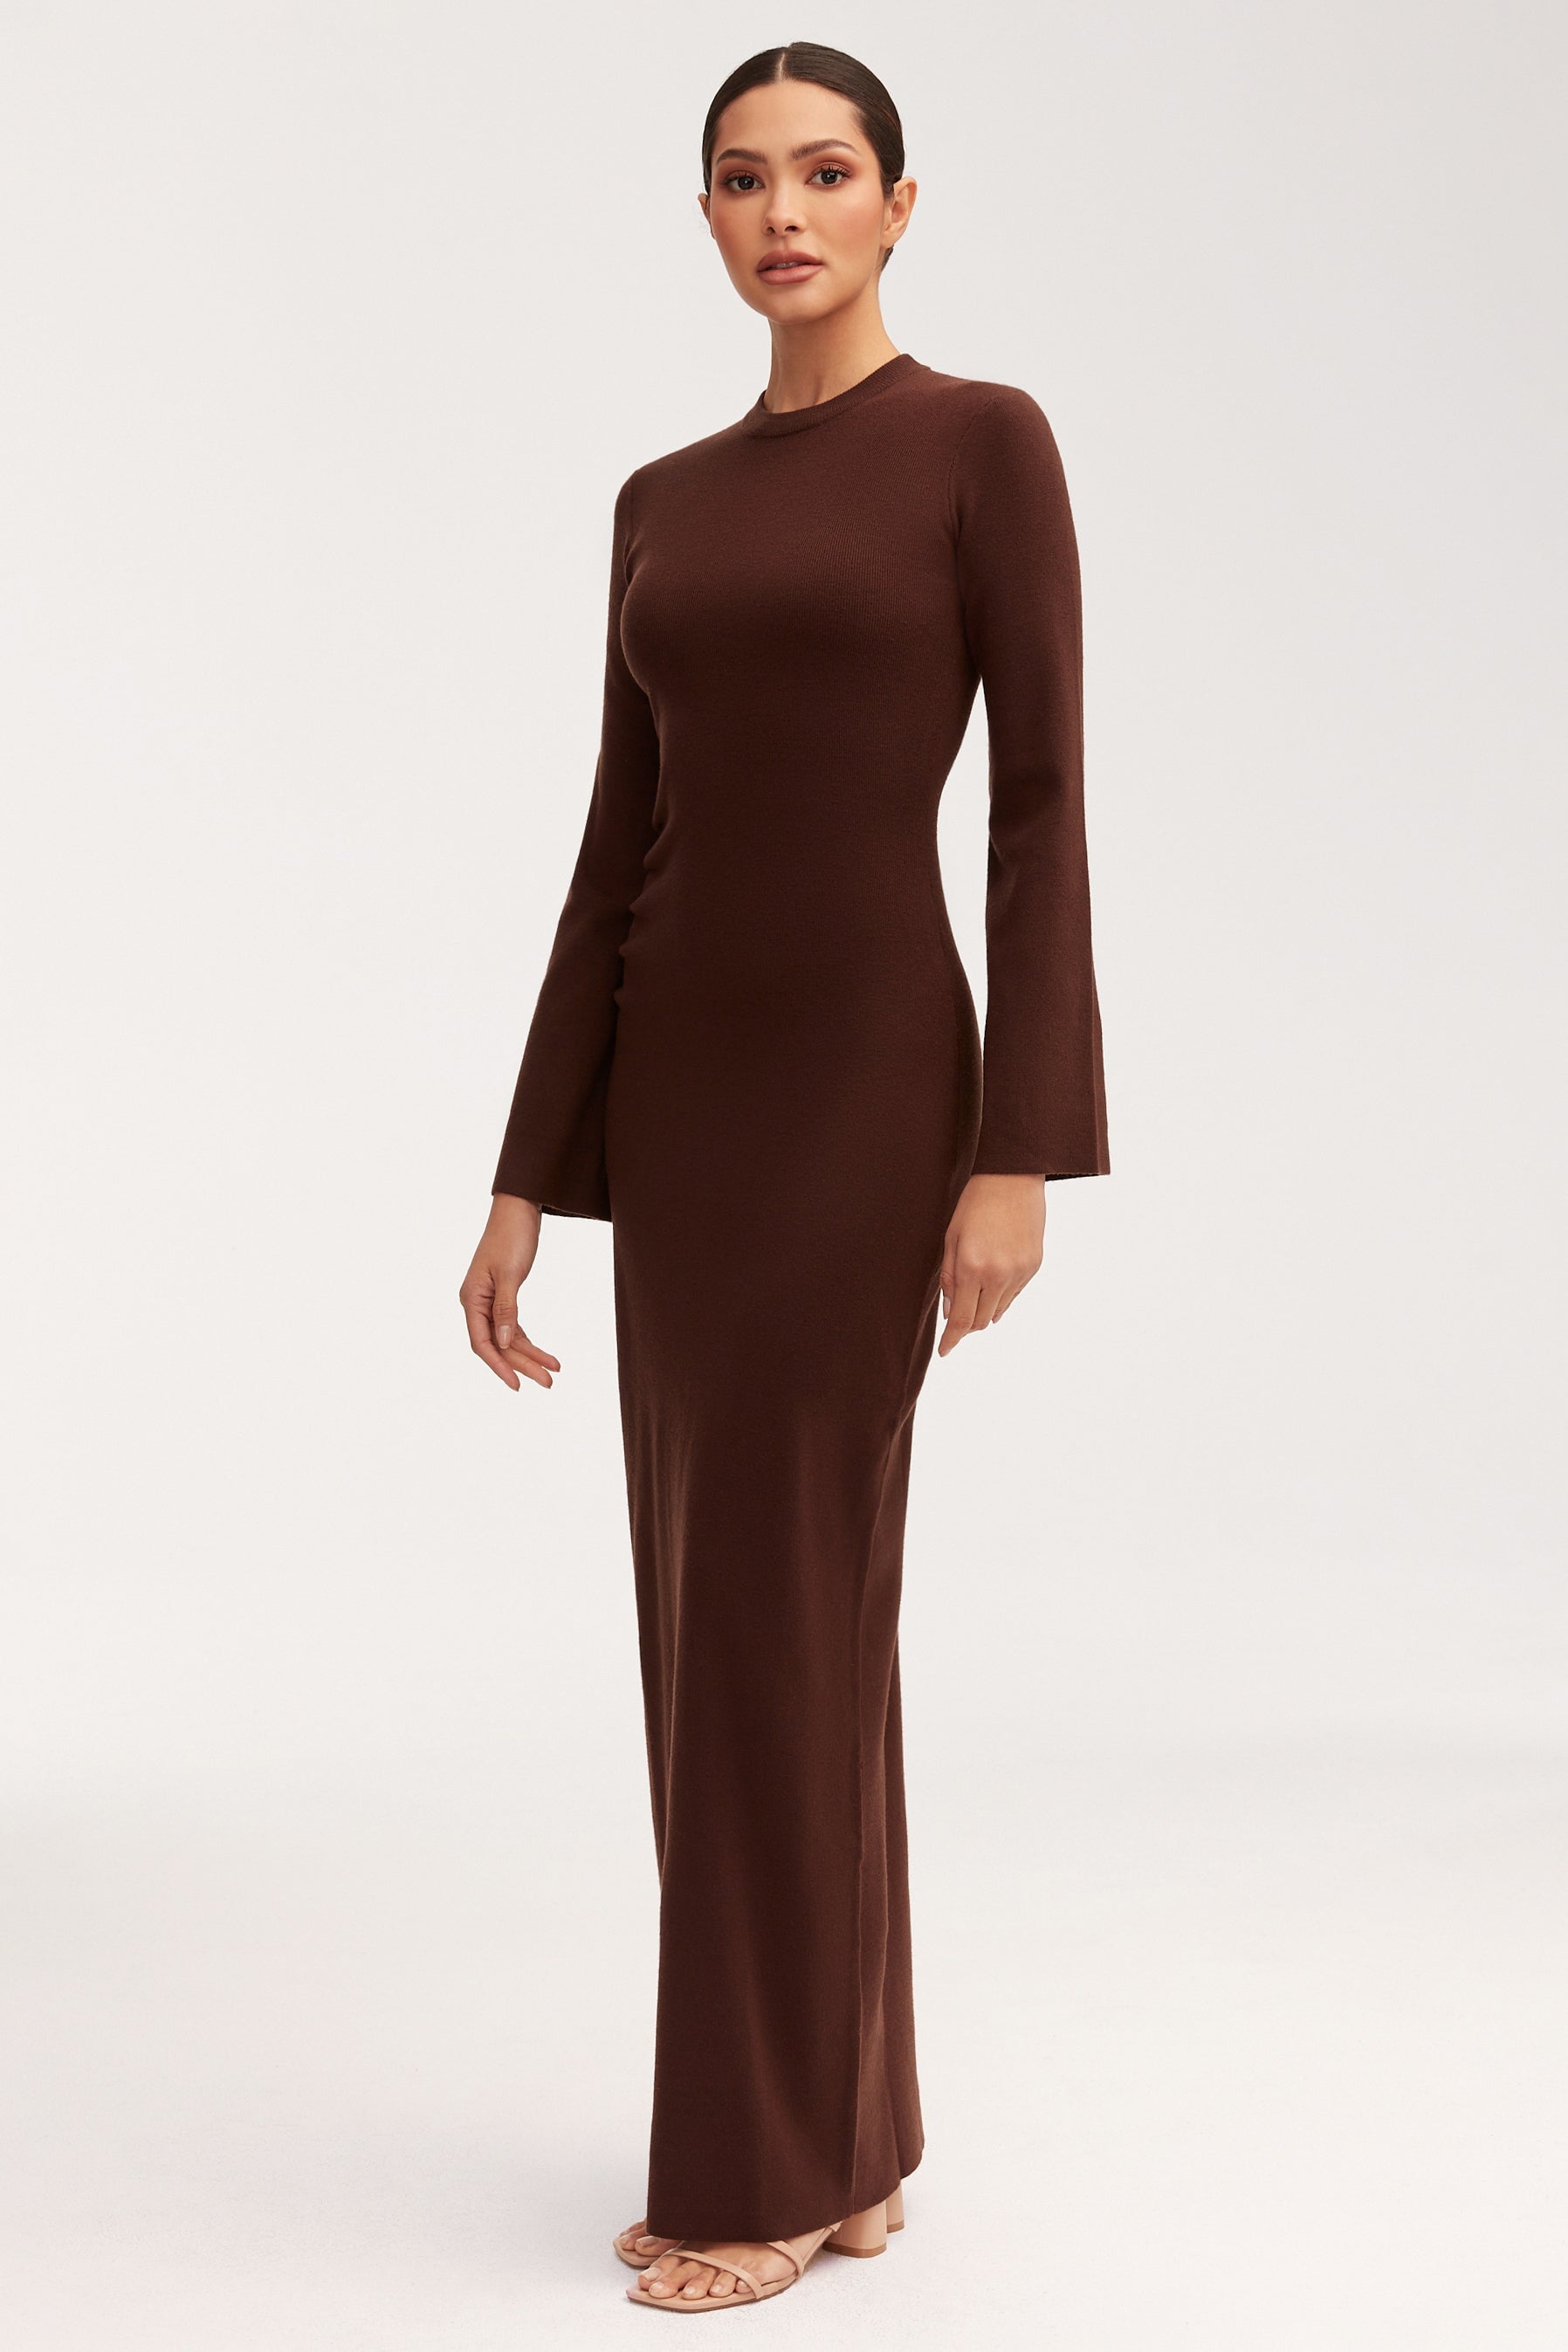 Abigail Rouched Knit Maxi Dress - Dark Brown Dresses Veiled 